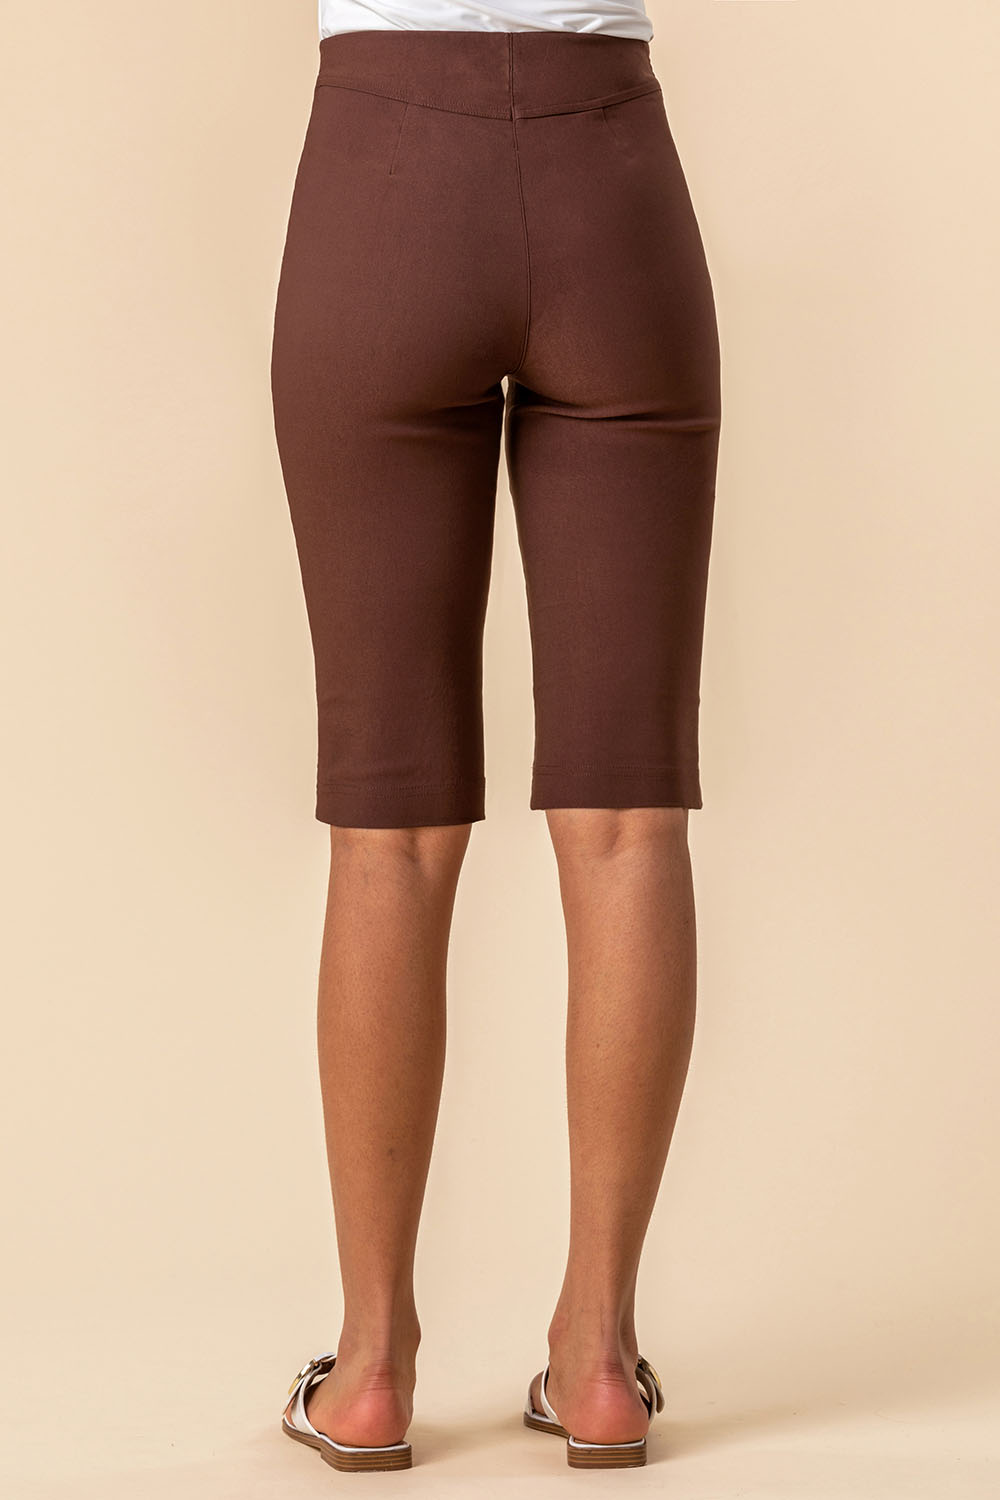 Brown Stretch Knee Length Shorts, Image 2 of 4